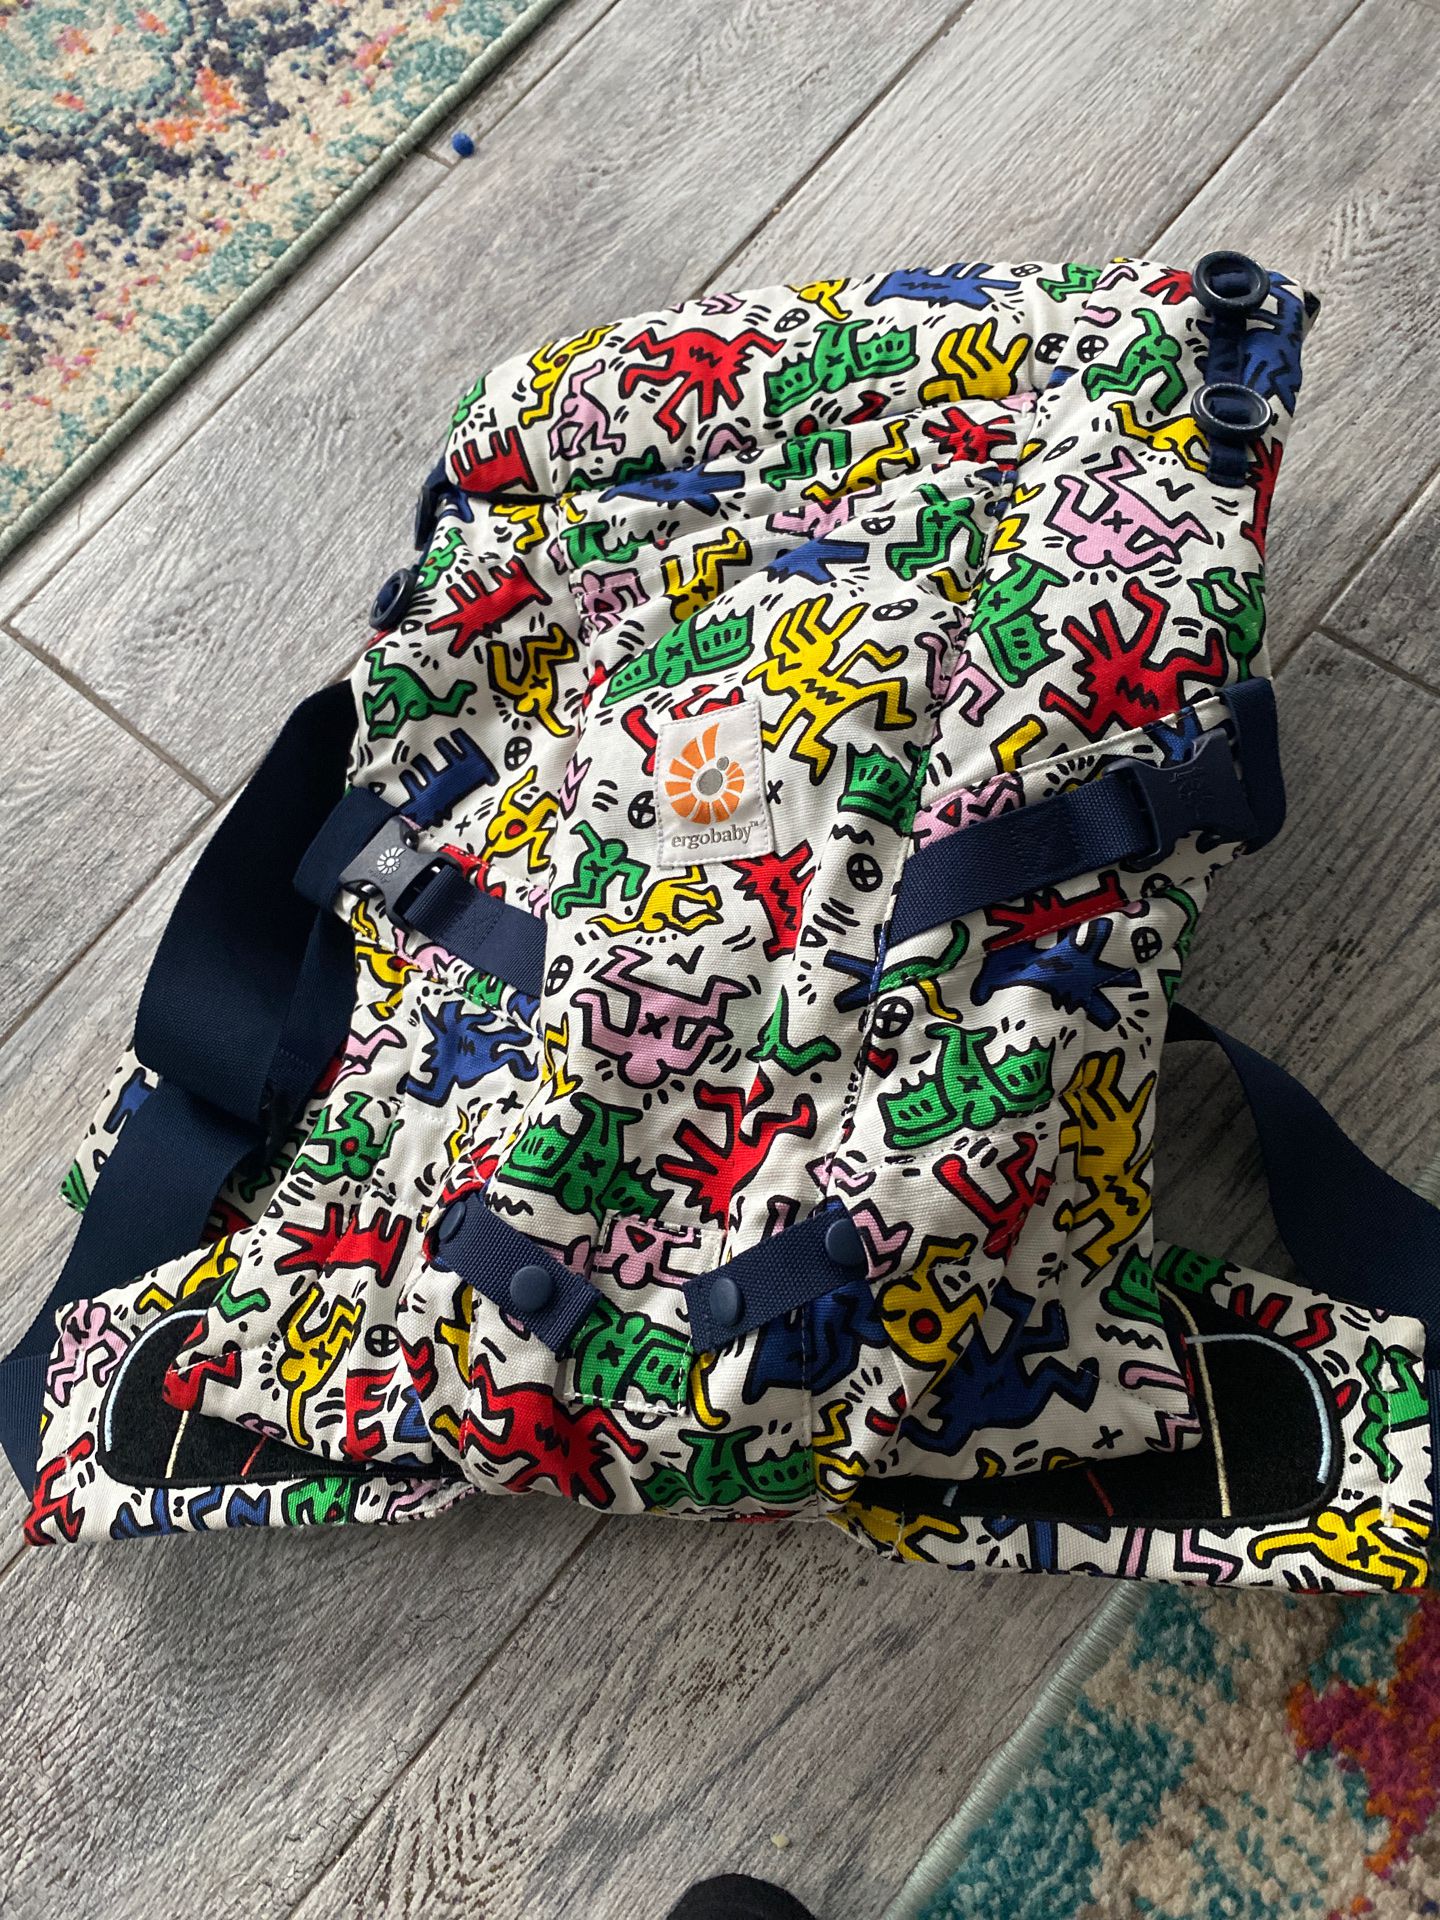 Ergo baby carrier Keith Haring edition 125 obo